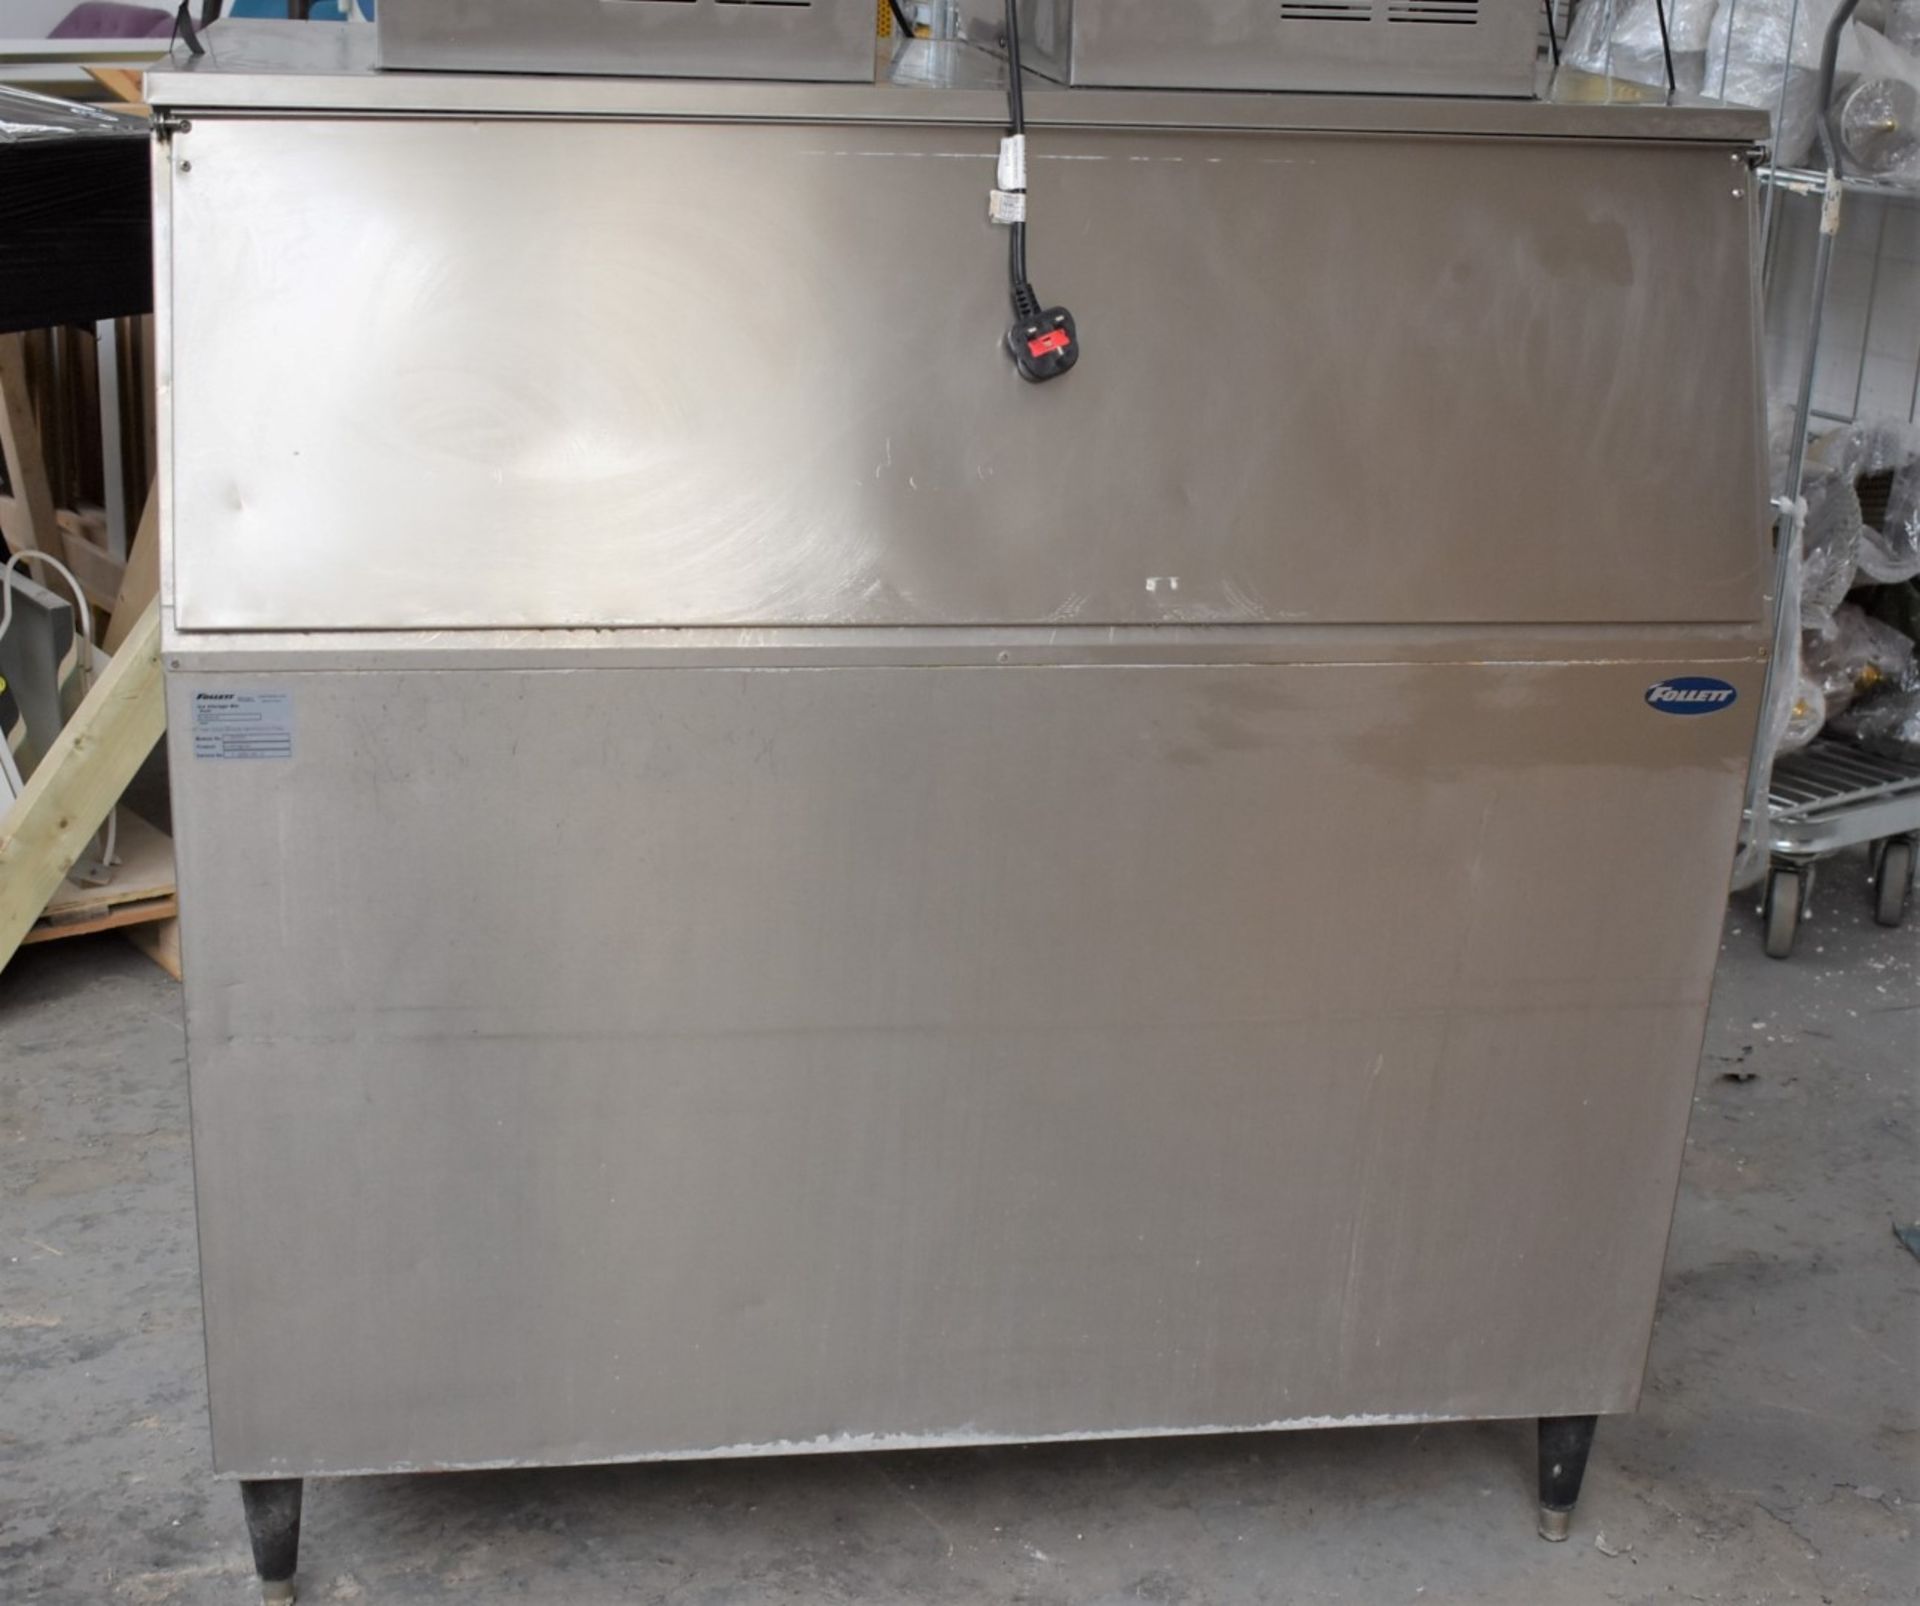 1 x Commercial Ice Maker With a Follett 431kg Ice Hopper and Two Ice Cool ICS700 Ice Making Heads - Image 12 of 15